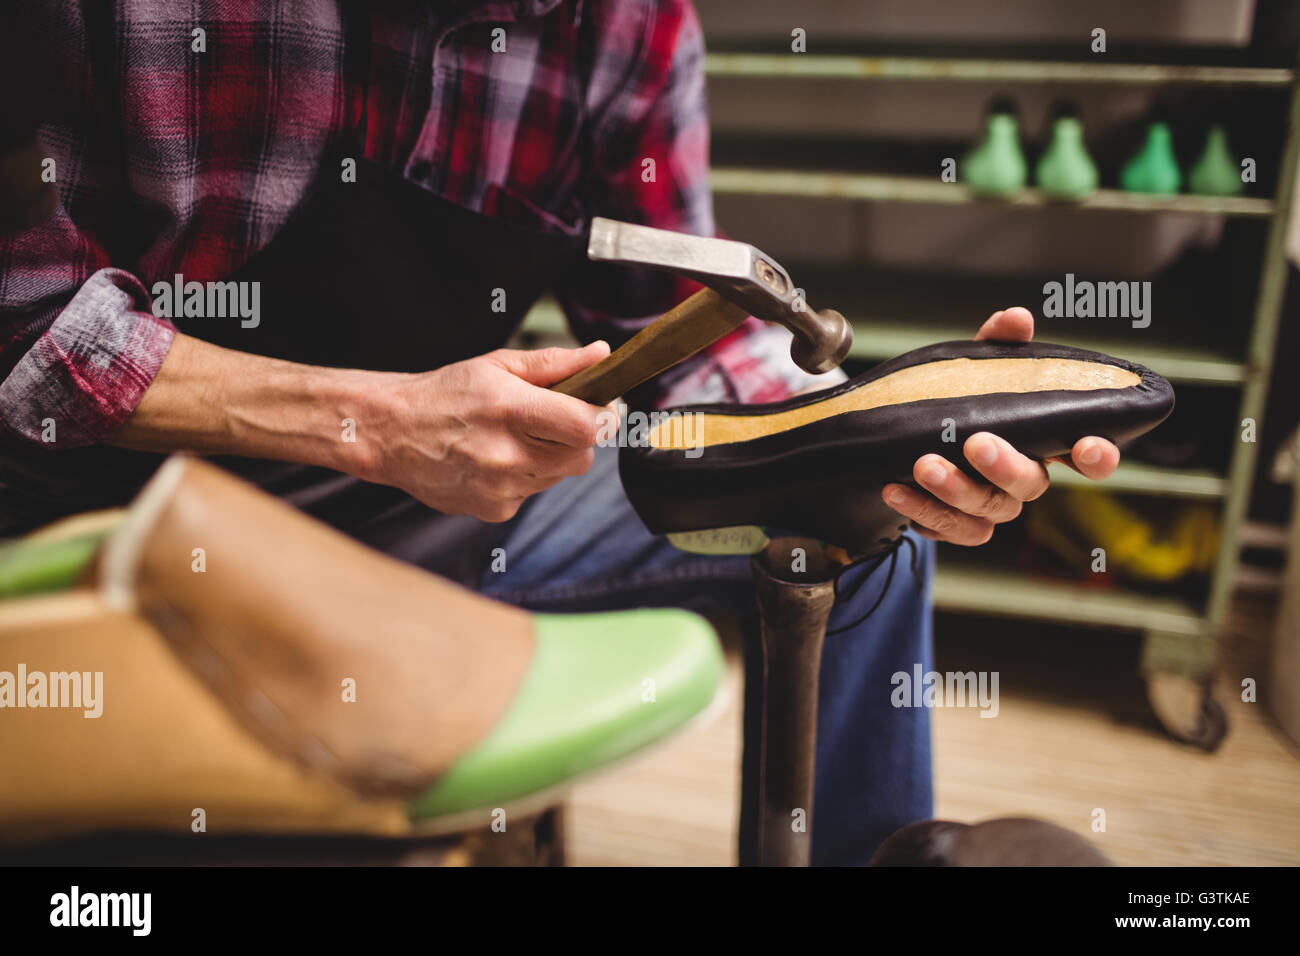 Close up of hand hammering on a shoe Stock Photo